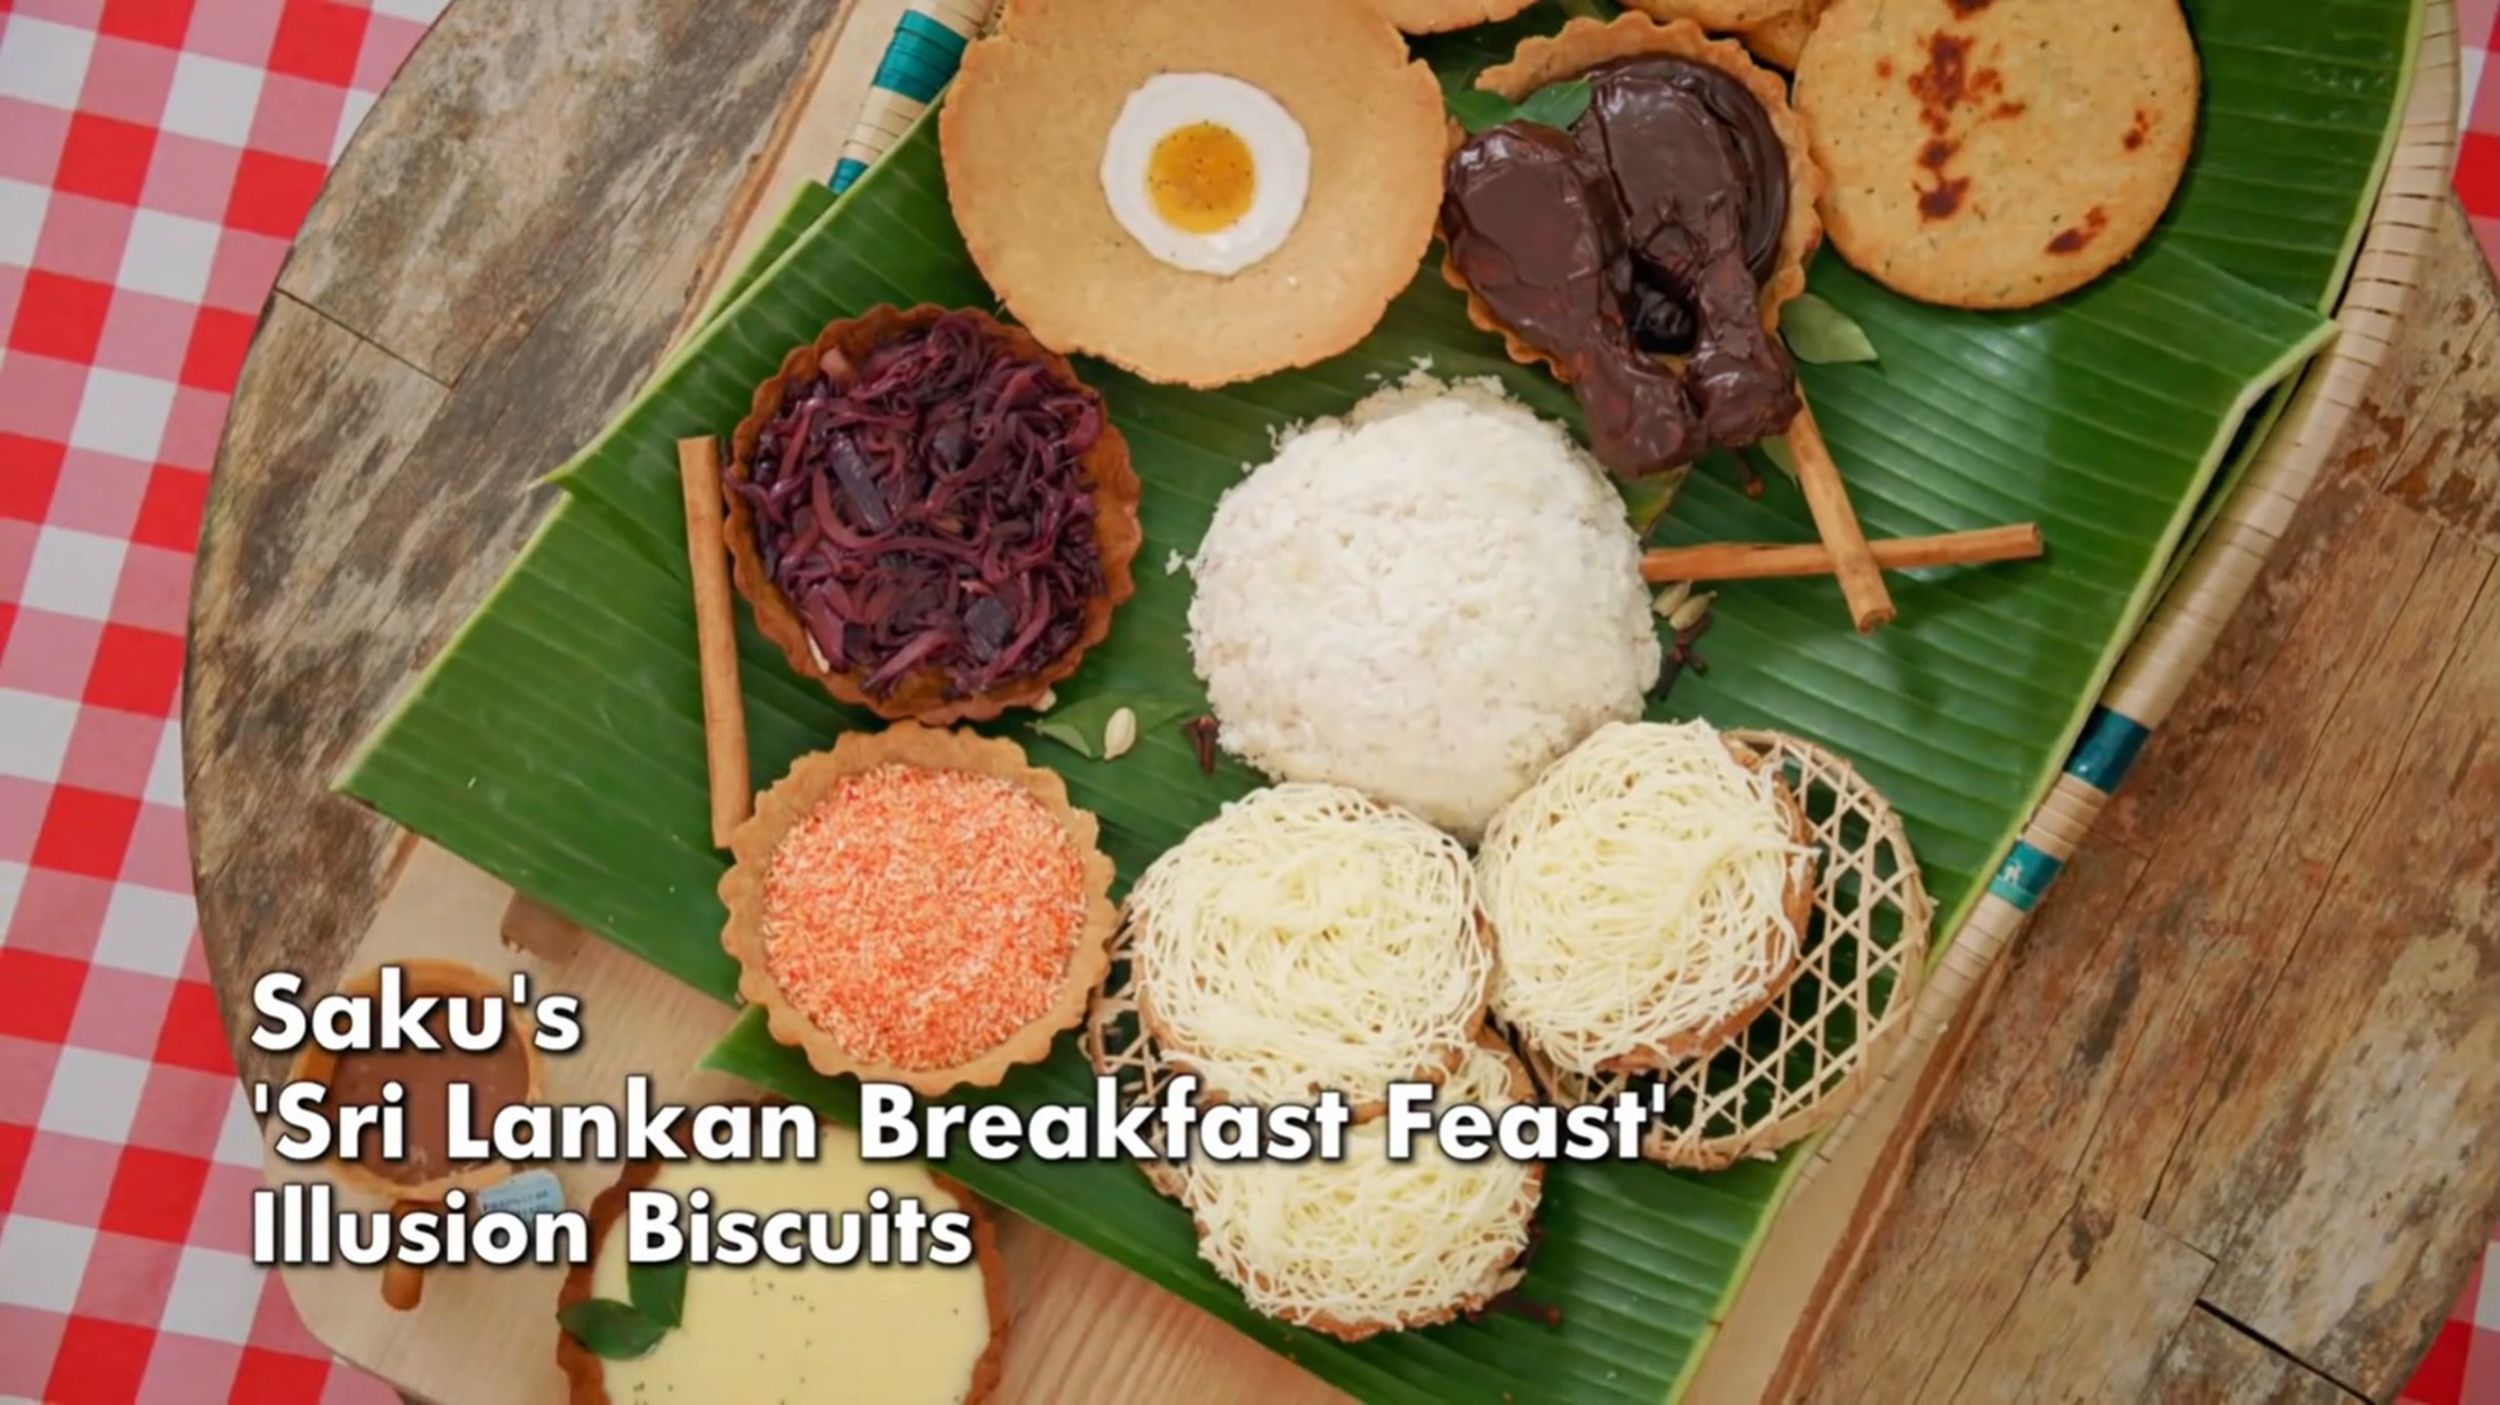 Saku’s Sri Lankan Breakfast Feast Illusion Biscuit Showstopper from 'The Great British Baking Show' Season 14's Biscuit Week